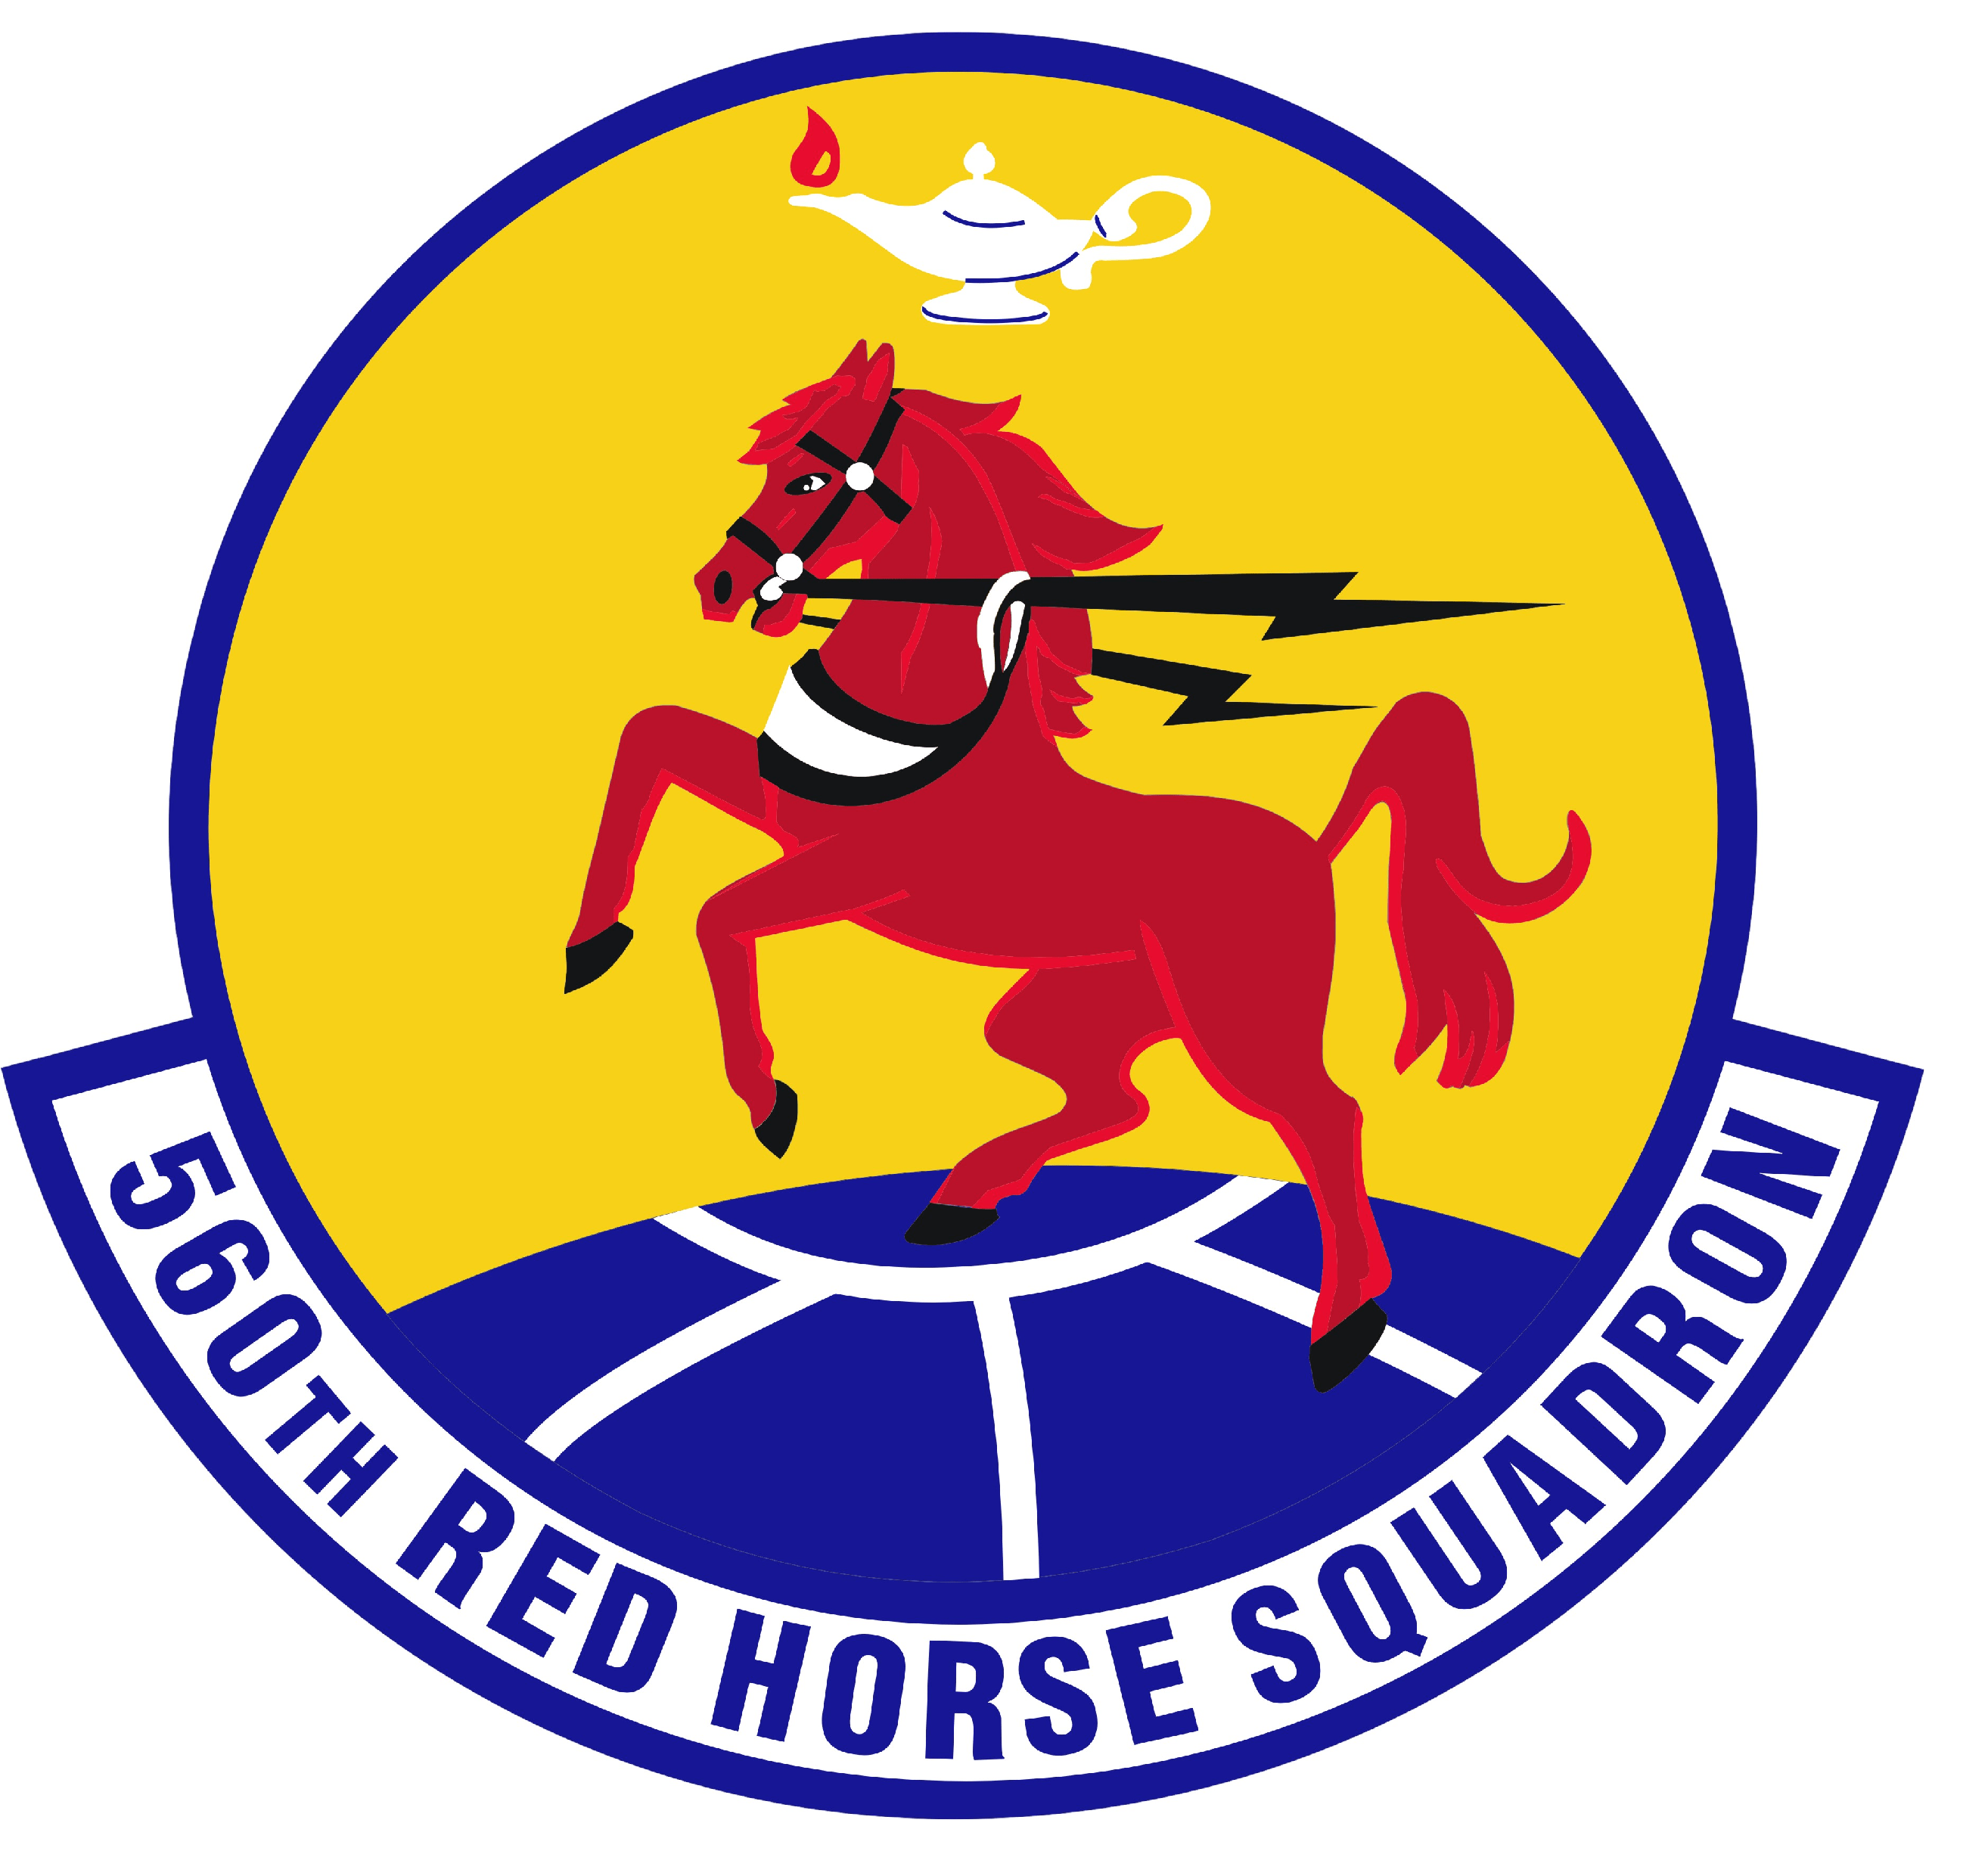 Red and Yellow Horse Logo - File:560 RED HORSE Sq emblem.png - Wikimedia Commons